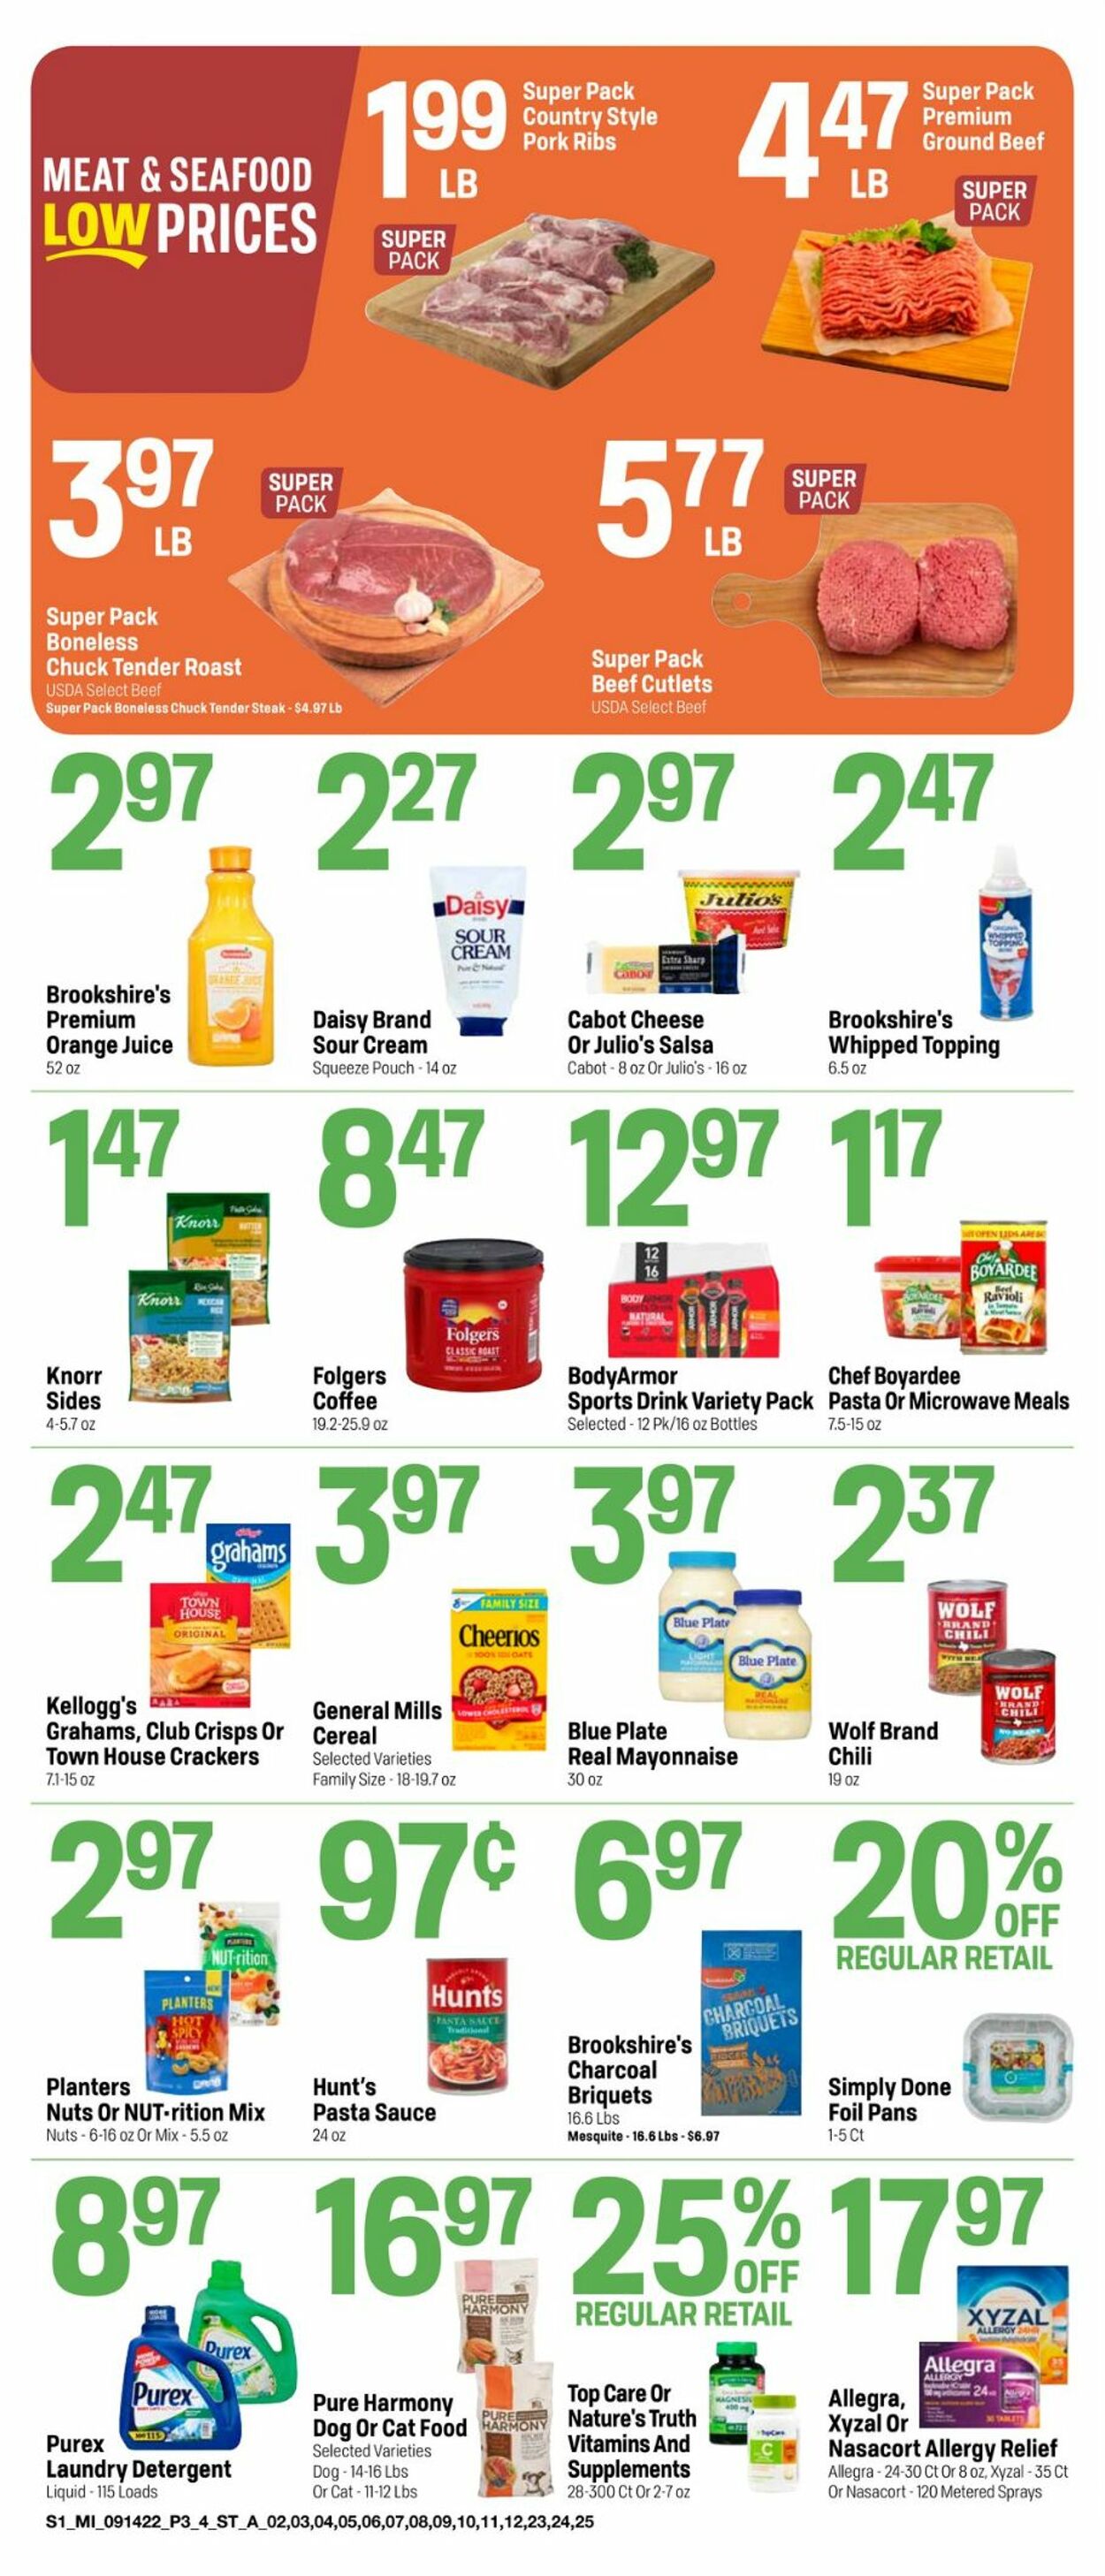 Catalogue Super 1 Foods from 09/14/2022